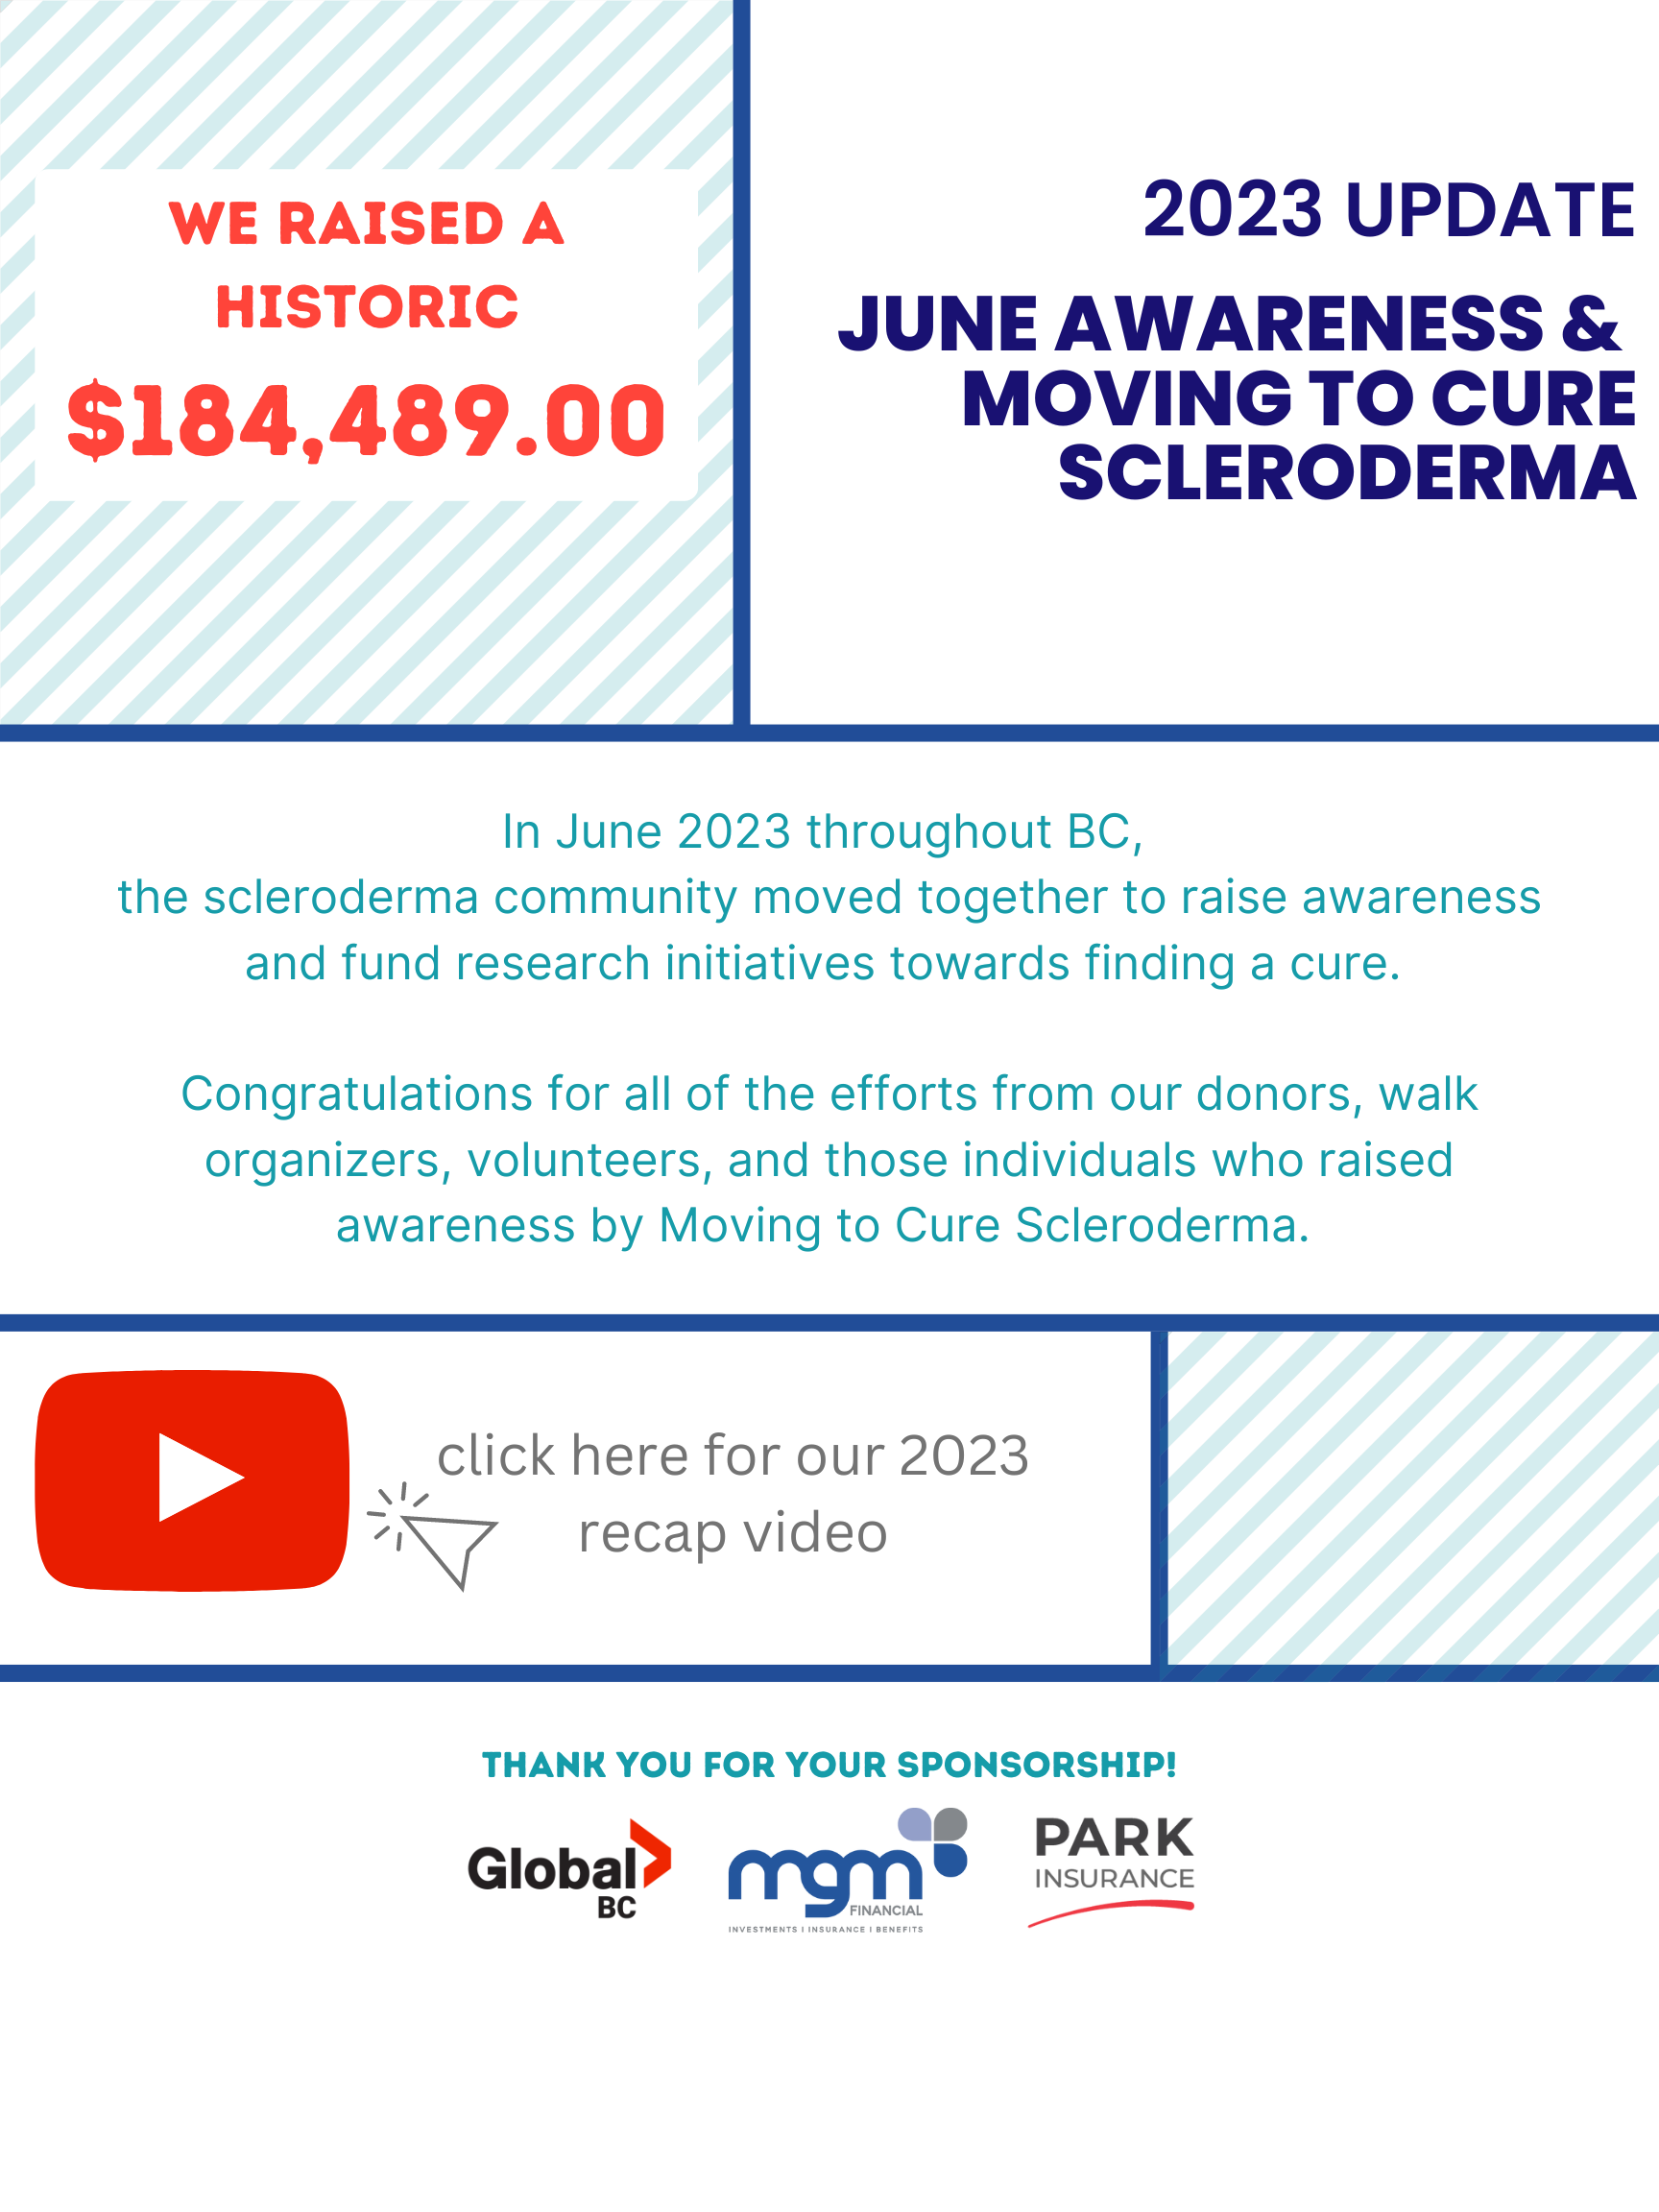 2023 June Awareness & Moving to Cure Scleroderma